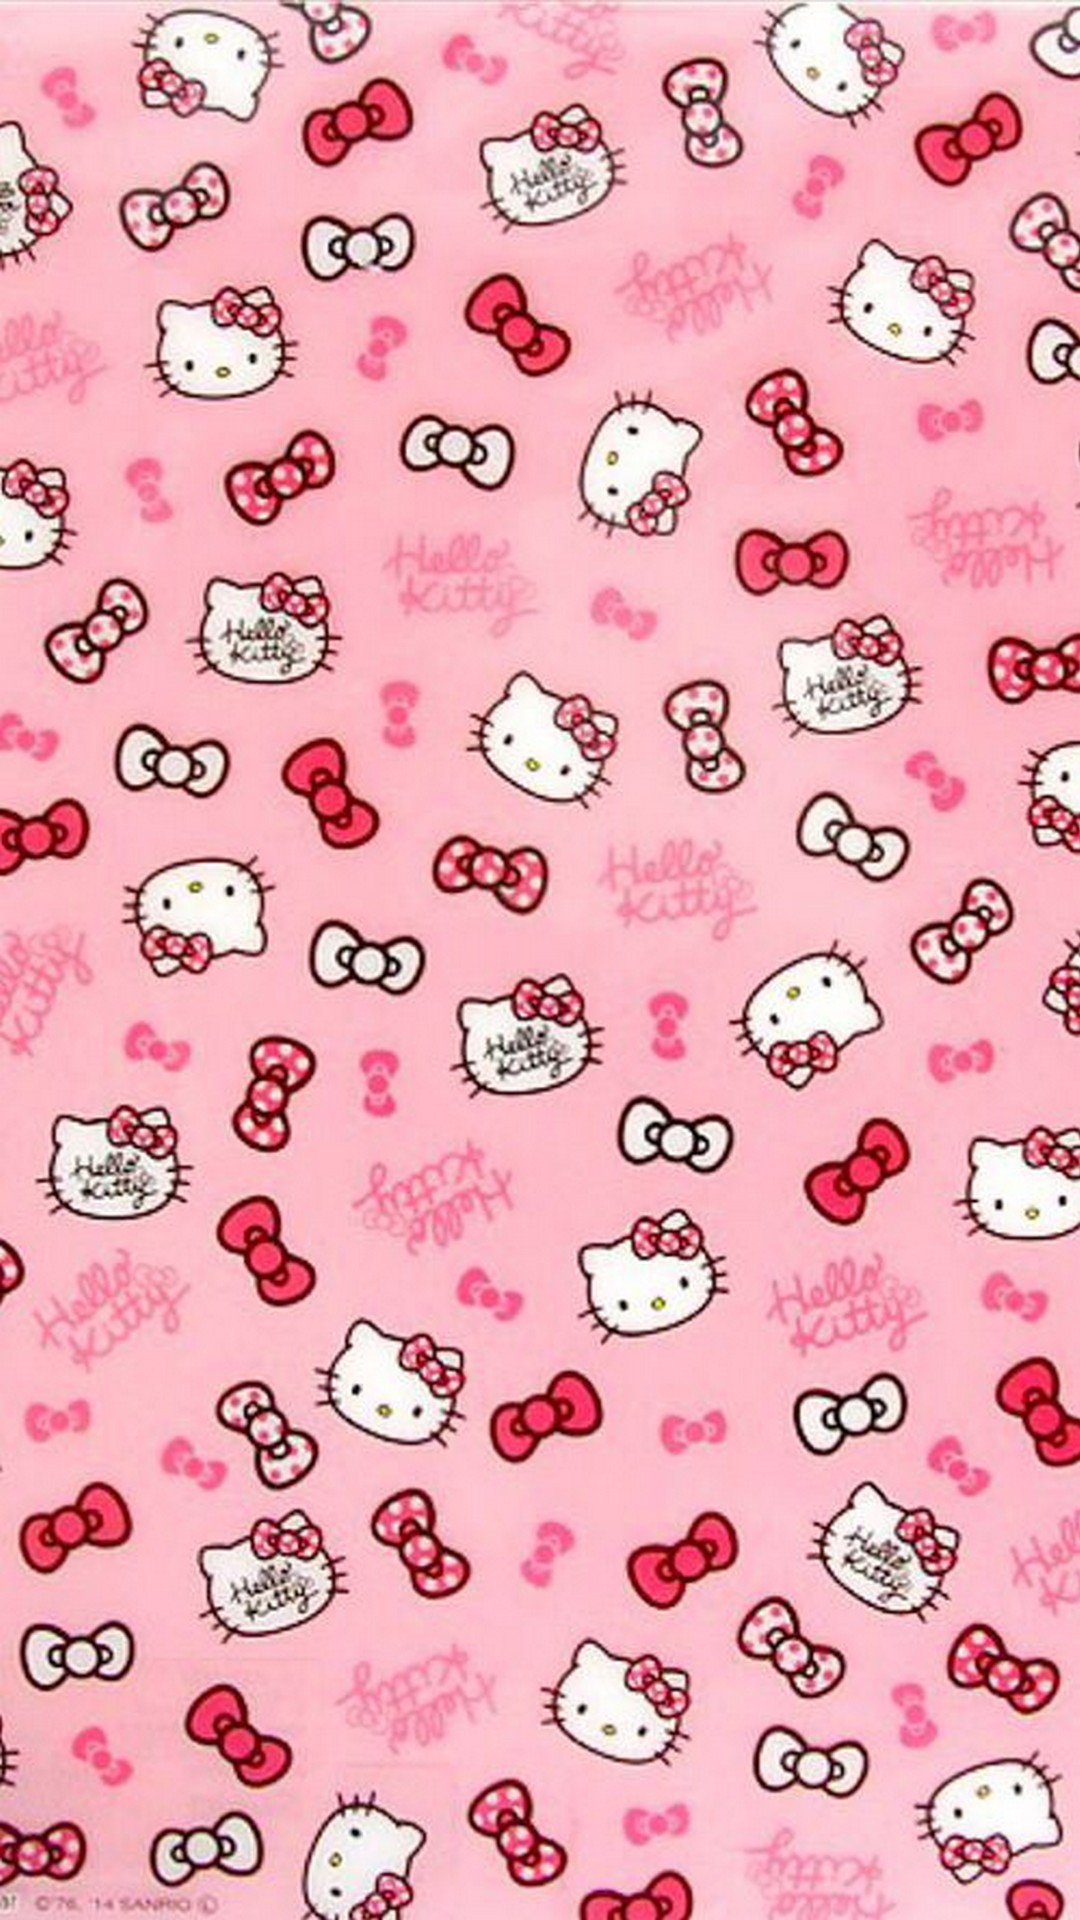 Hello Kitty Pictures Wallpaper iPhone HD with image resolution 1080x1920 pixel. You can use this wallpaper as background for your desktop Computer Screensavers, Android or iPhone smartphones